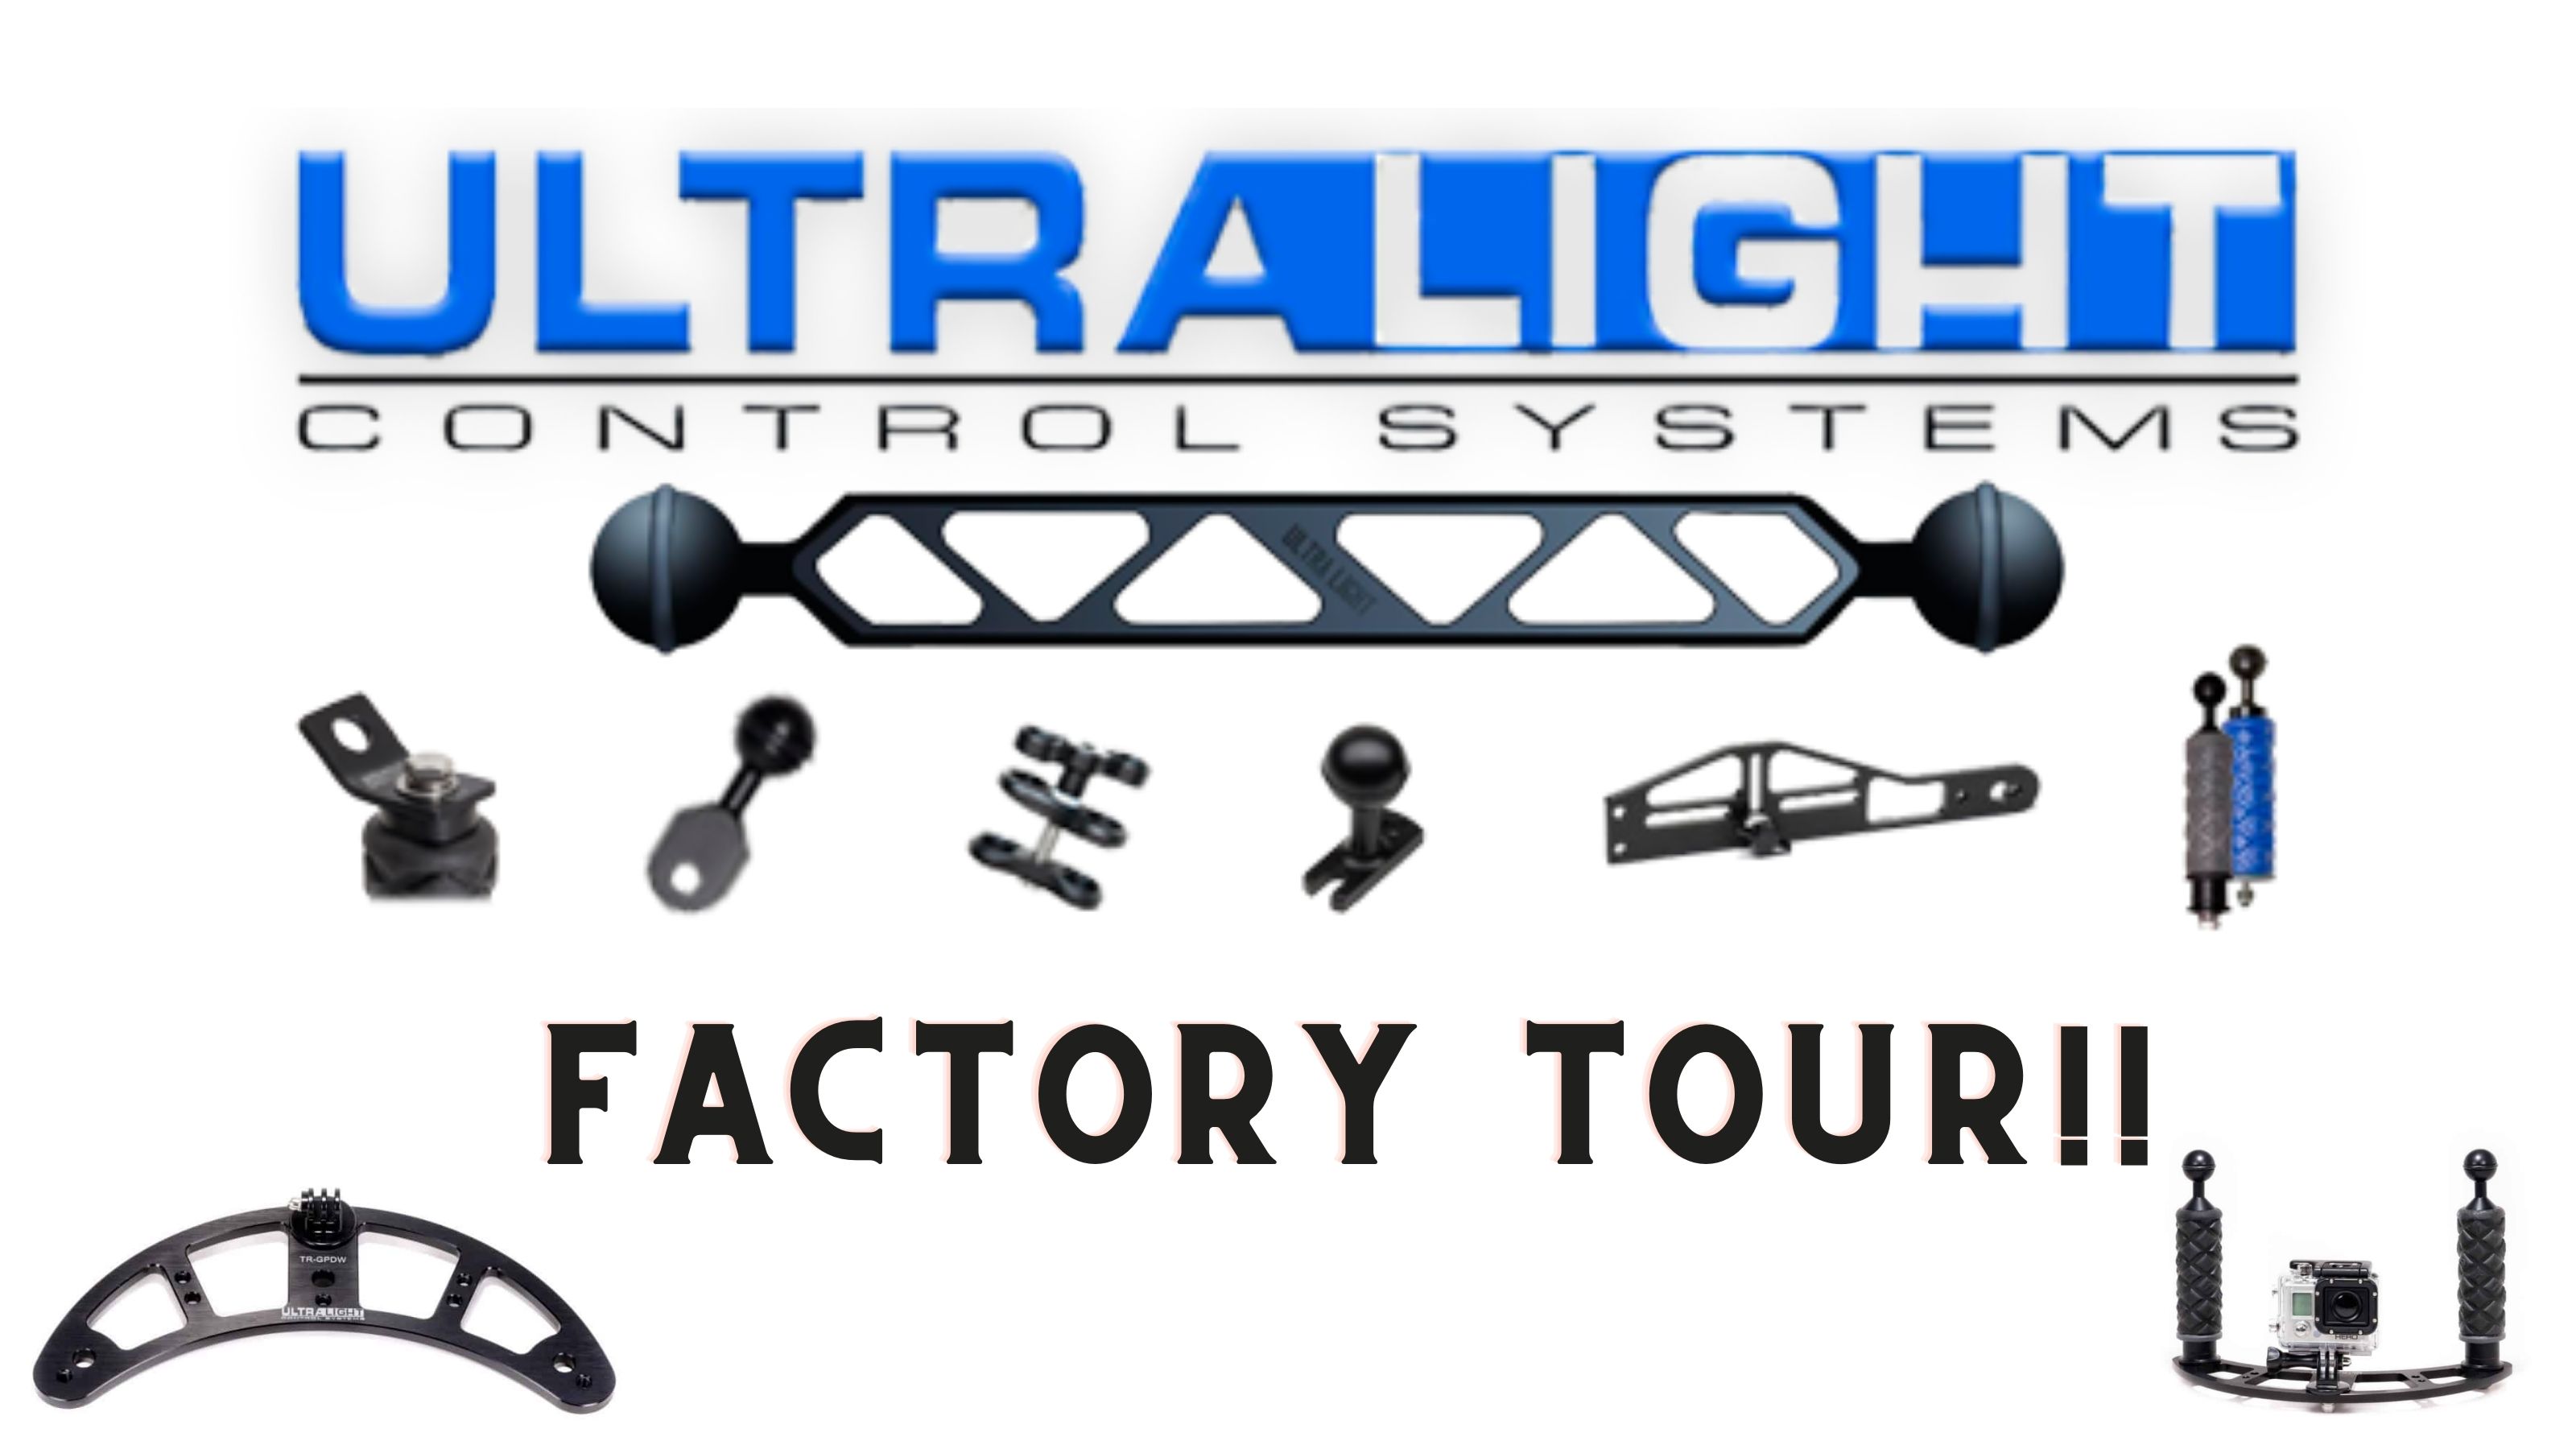 Touring the Ultralight Factory - Arms, Clamps, Gadgets, and more!